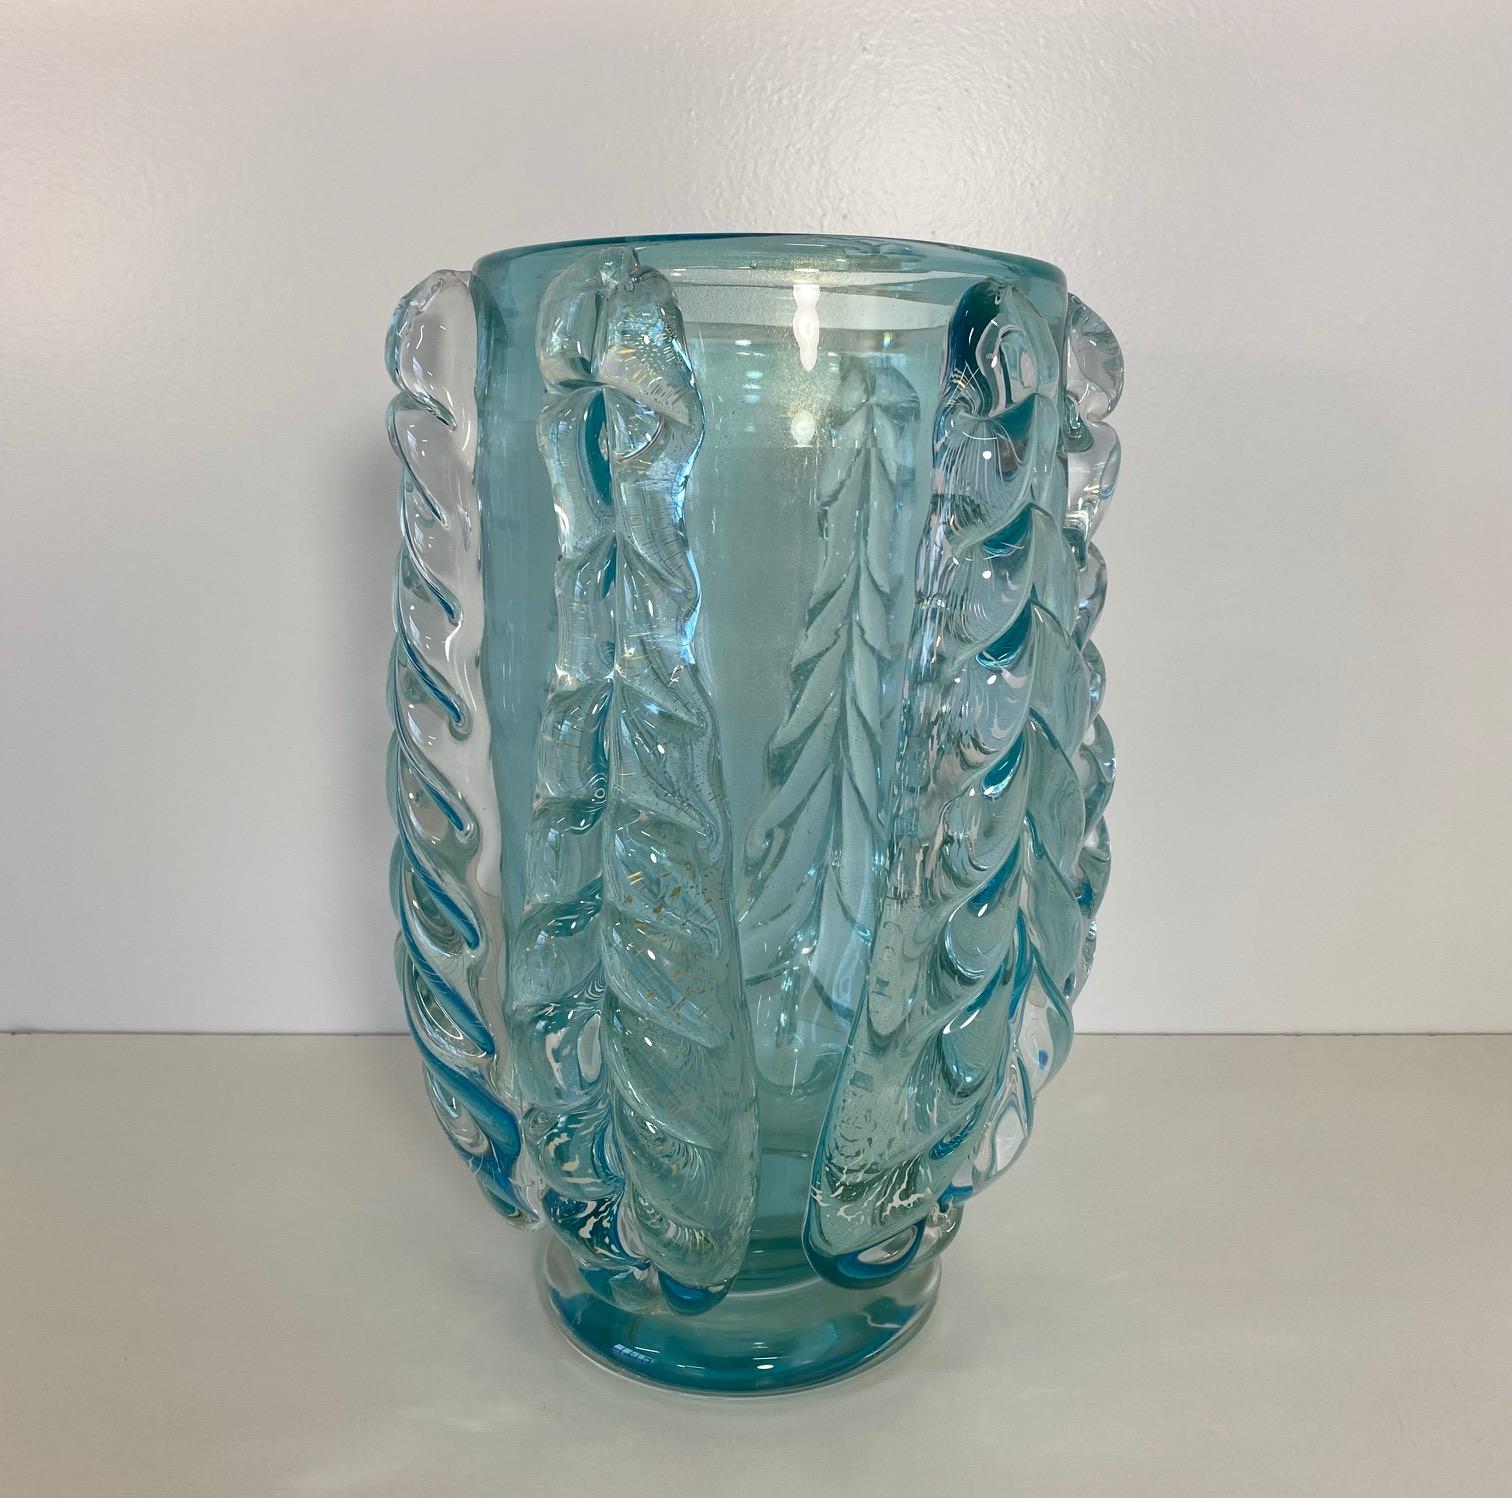 This elegant and rare vase was produced in Italy, more precisely in Murano, which is the world's capital of glass art making and crafting. 

The vase is made of turquoise Murano glass finely handmade and decorated by great glass master